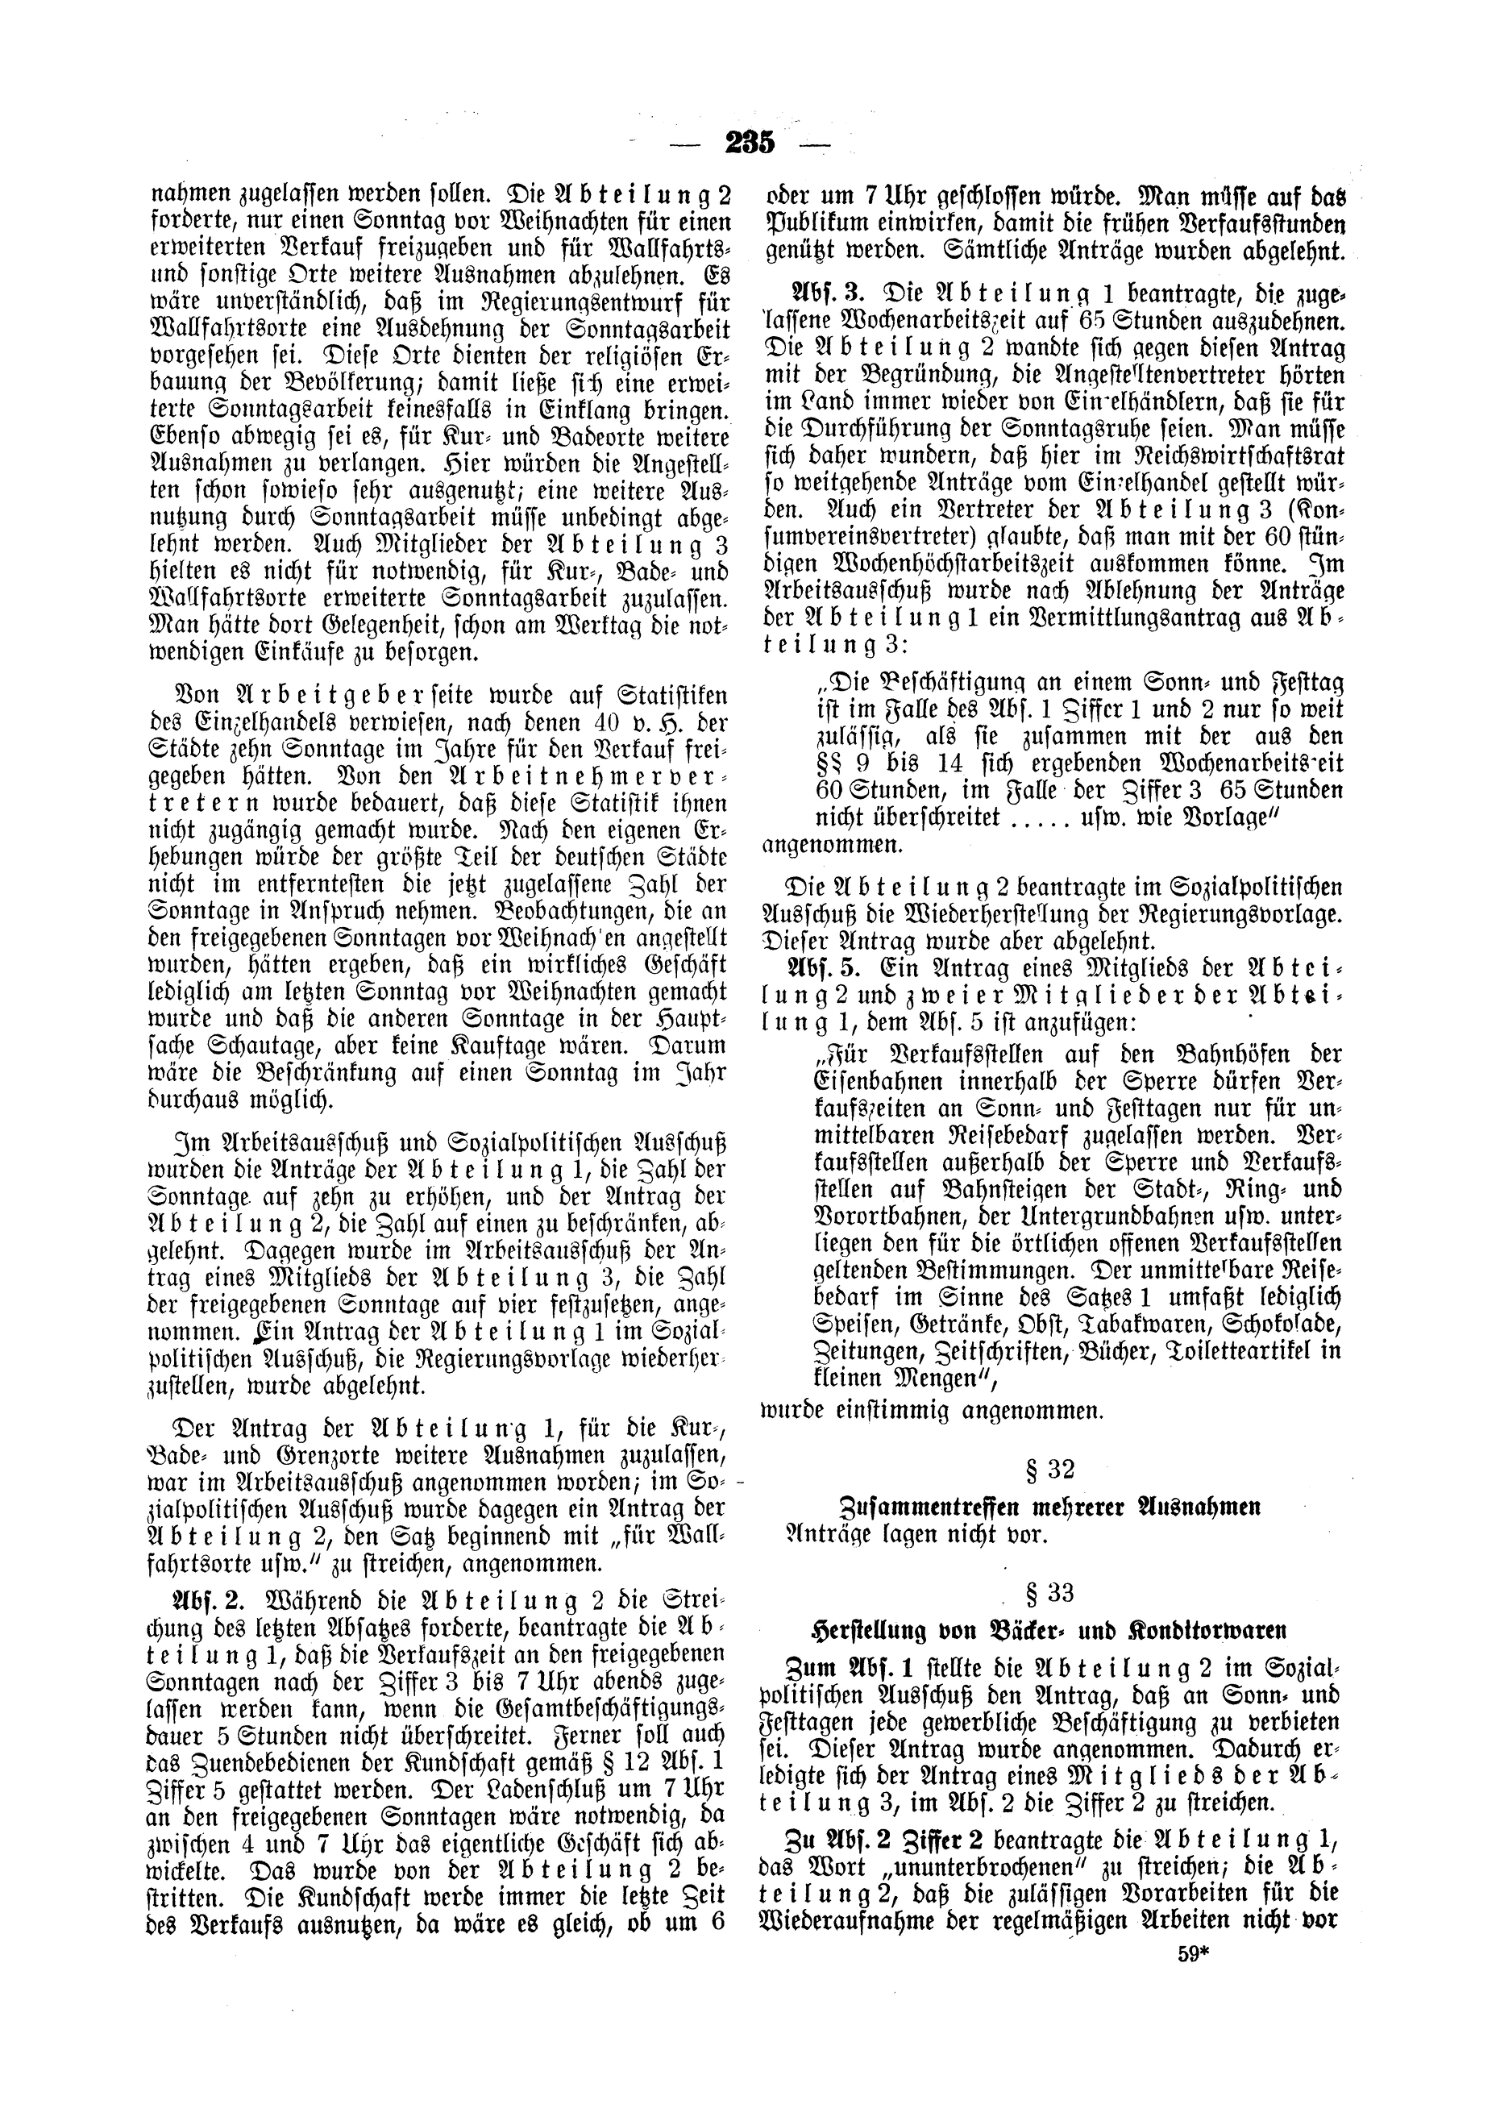 Scan of page 235